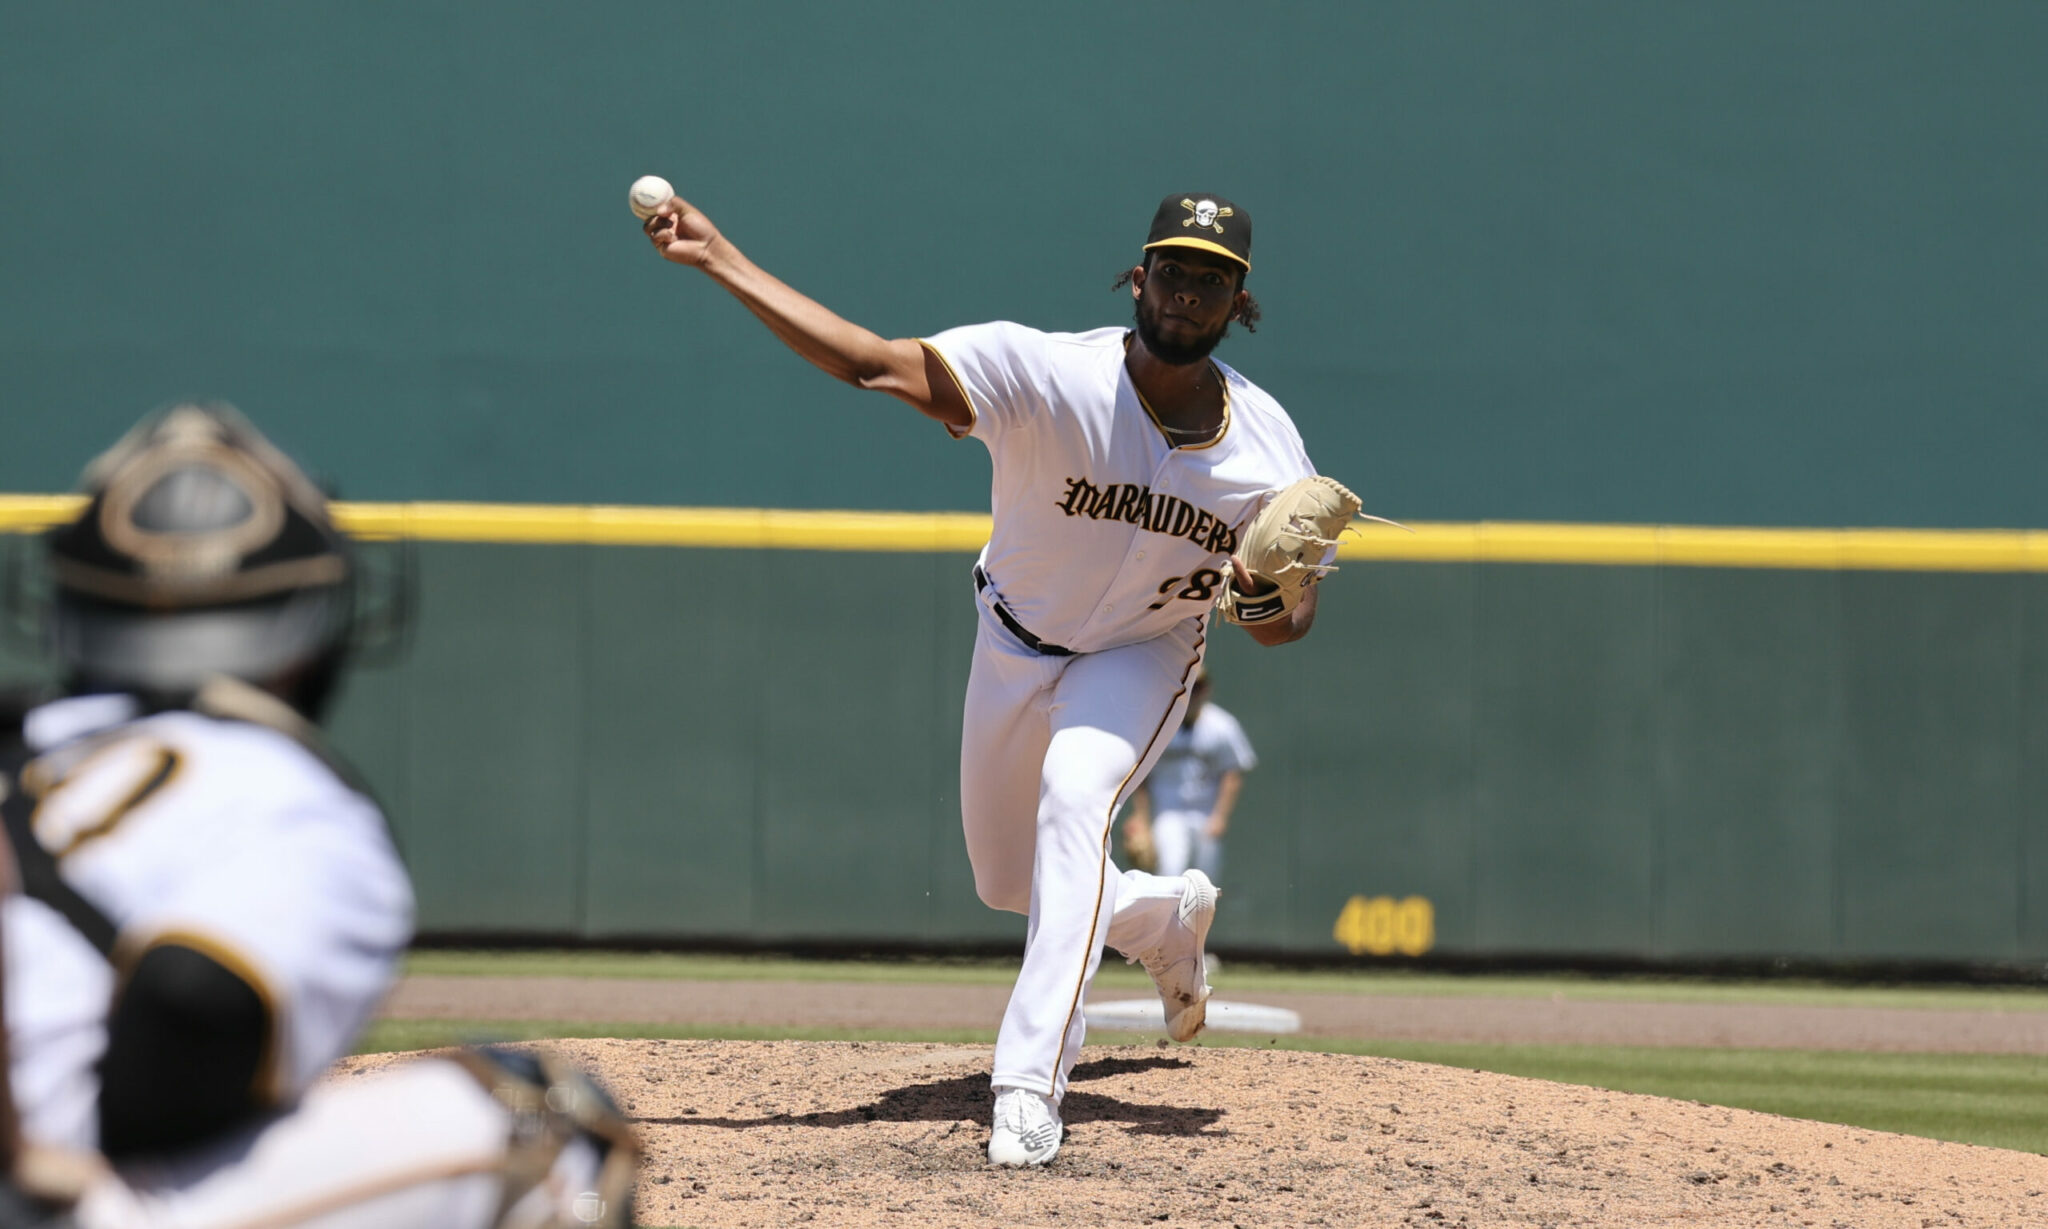 Wilber Dotel: Struggling With Command In Early Bradenton Appearances